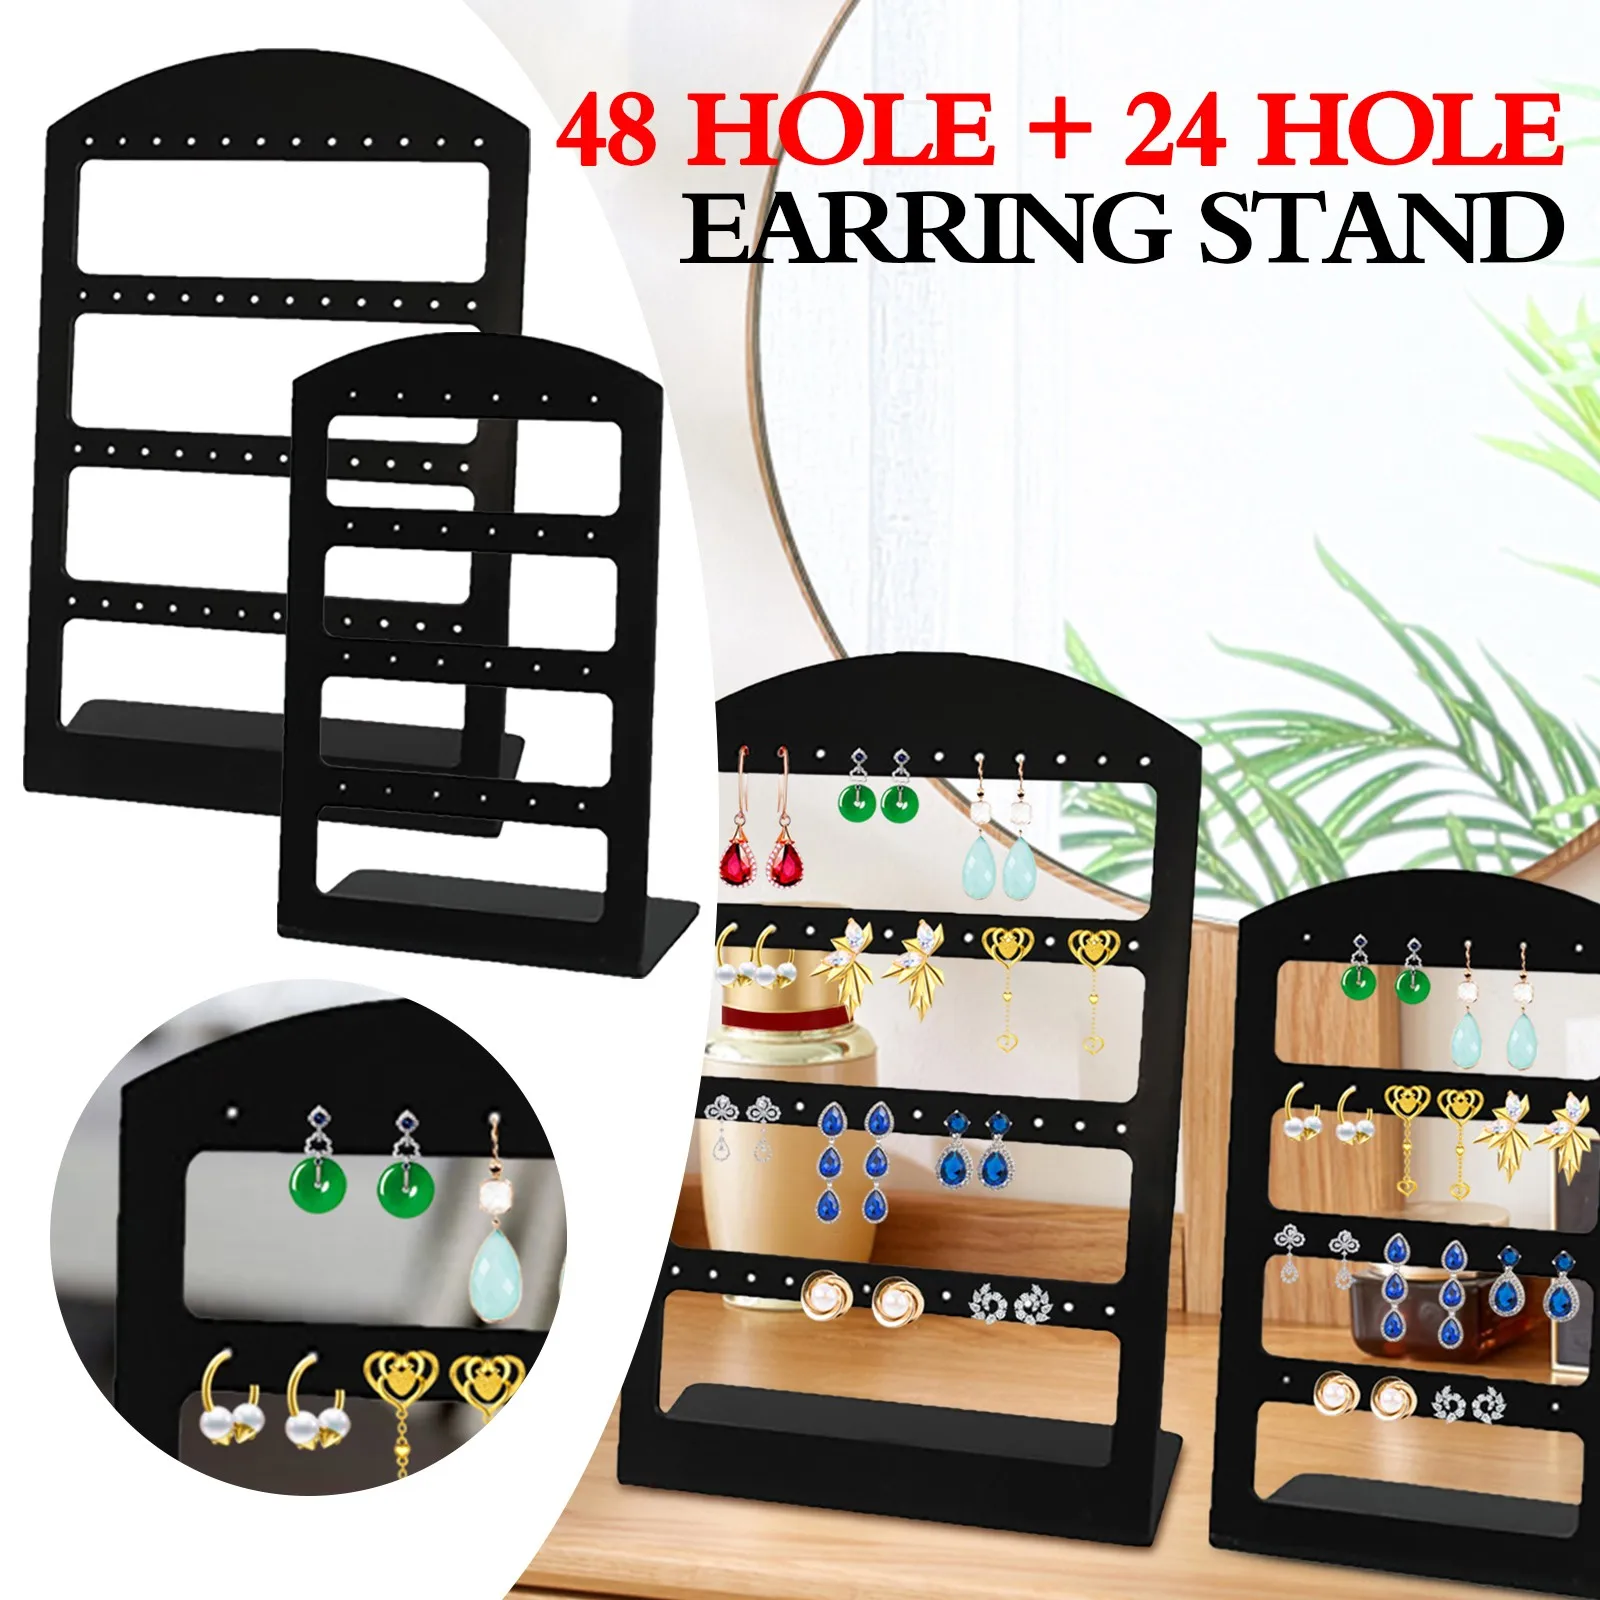 24/48 Holes Plastic Earrings Display Stand ewelry Holder Show Case Tool Rack NEW 